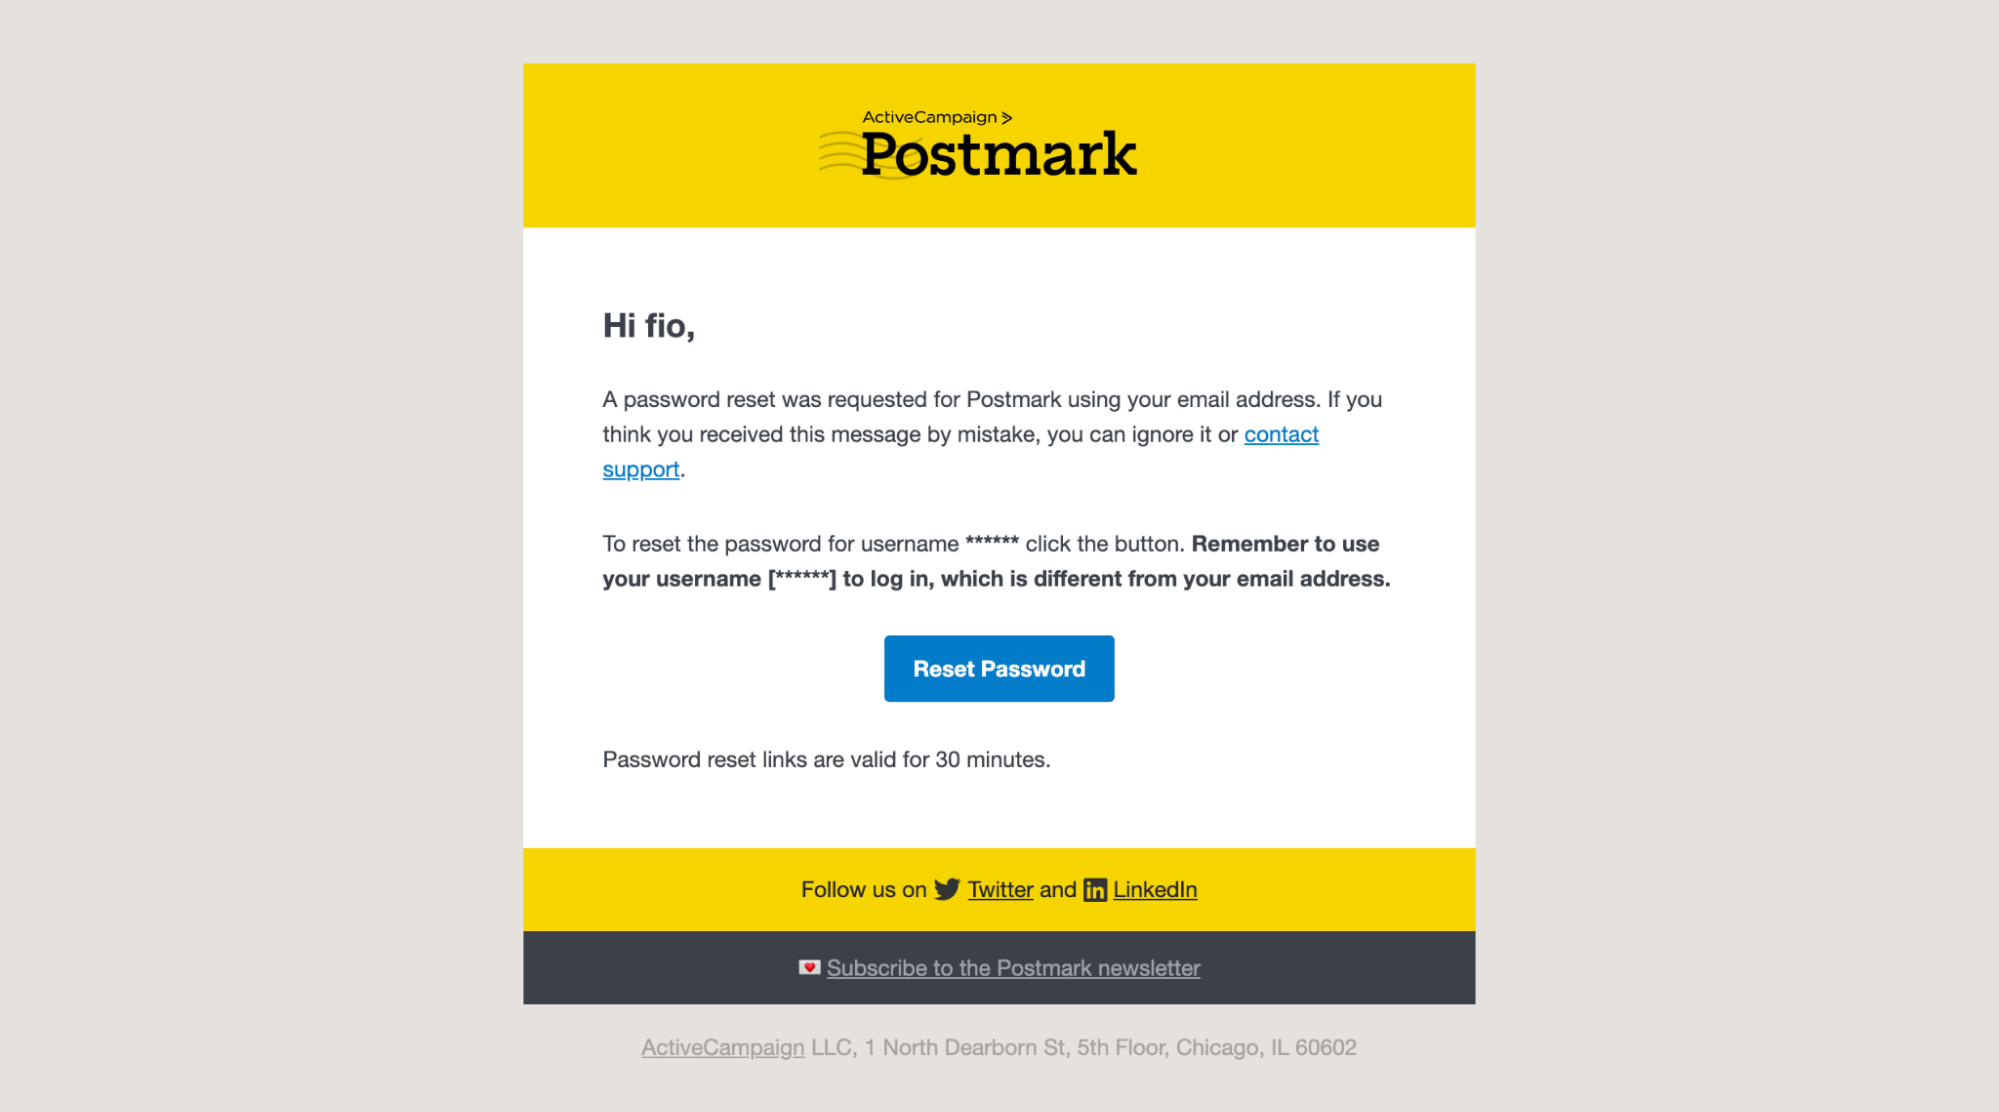 Transactional email, real example of an automatic message